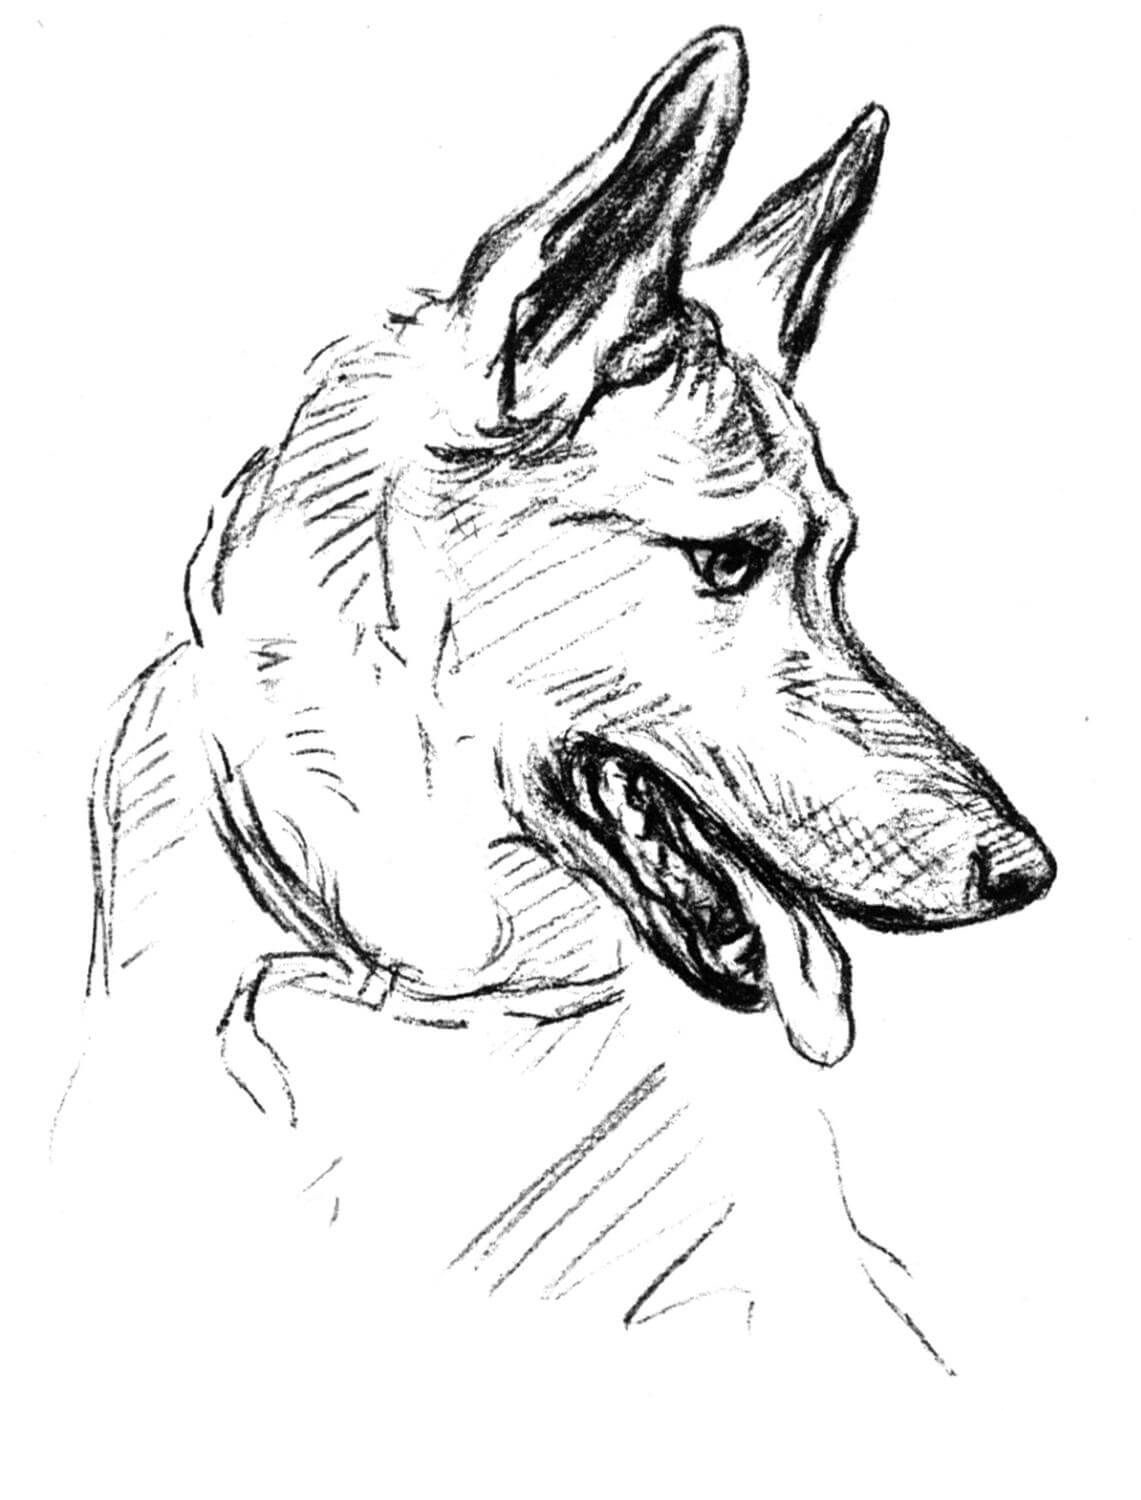 How To Draw A German Shepherd | Step By Step - YouTube